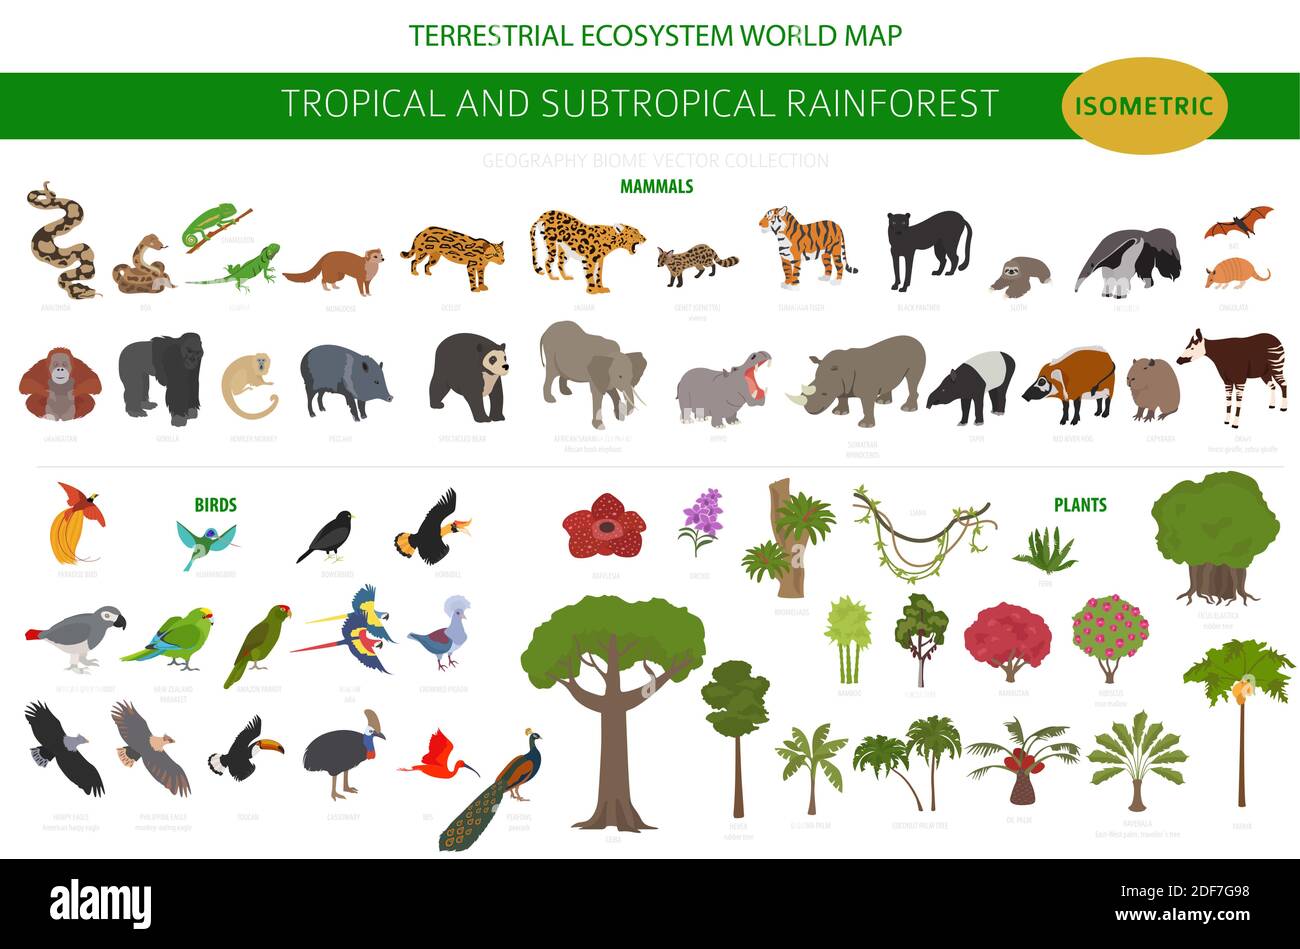 Tropical and subtropical rainforest biome, natural region infographic. Amazonian, African, asian, australian rainforests. Animals, birds and vegetatio Stock Vector